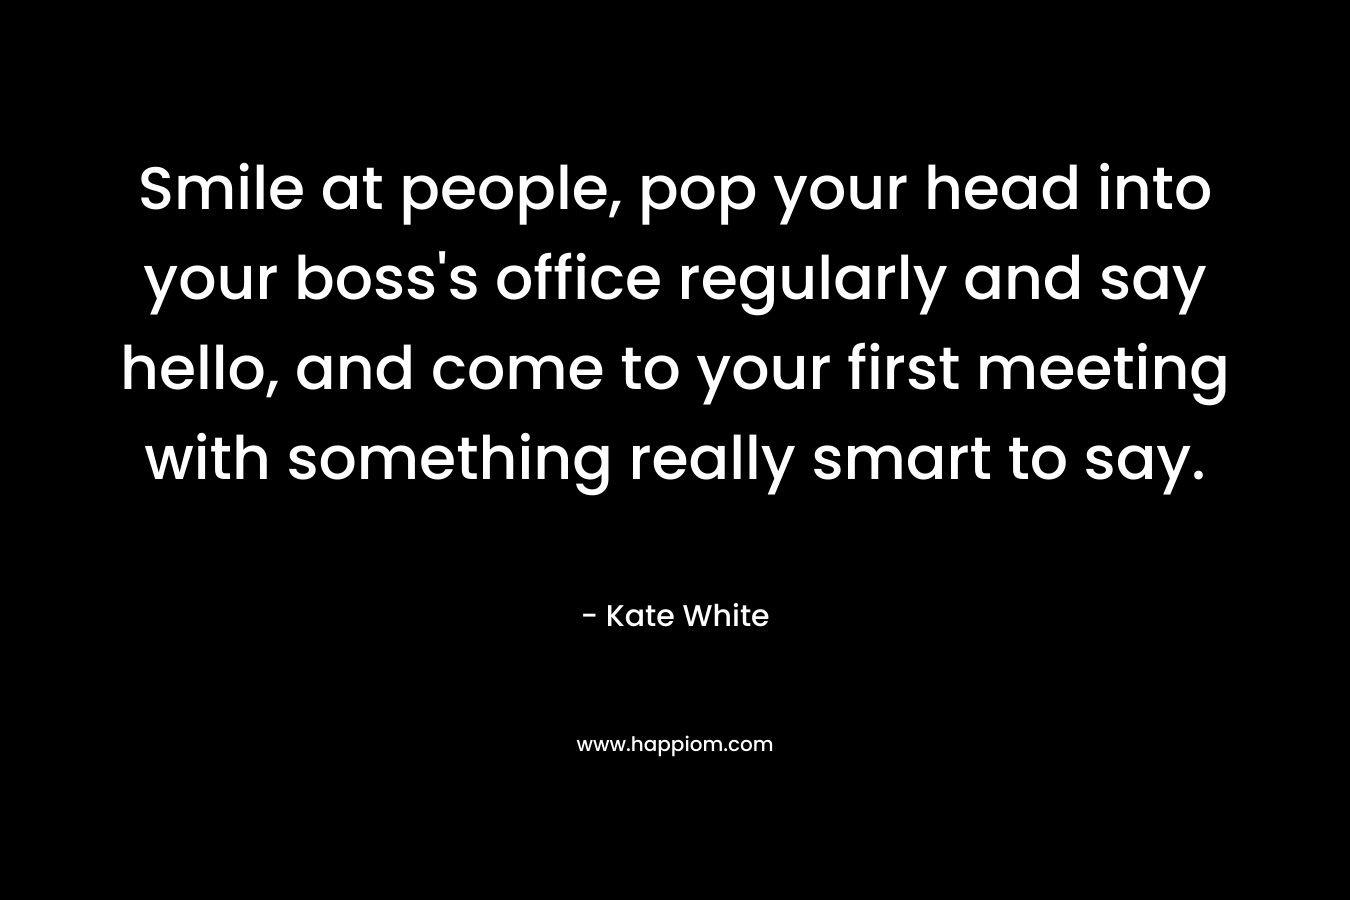 Smile at people, pop your head into your boss’s office regularly and say hello, and come to your first meeting with something really smart to say. – Kate White